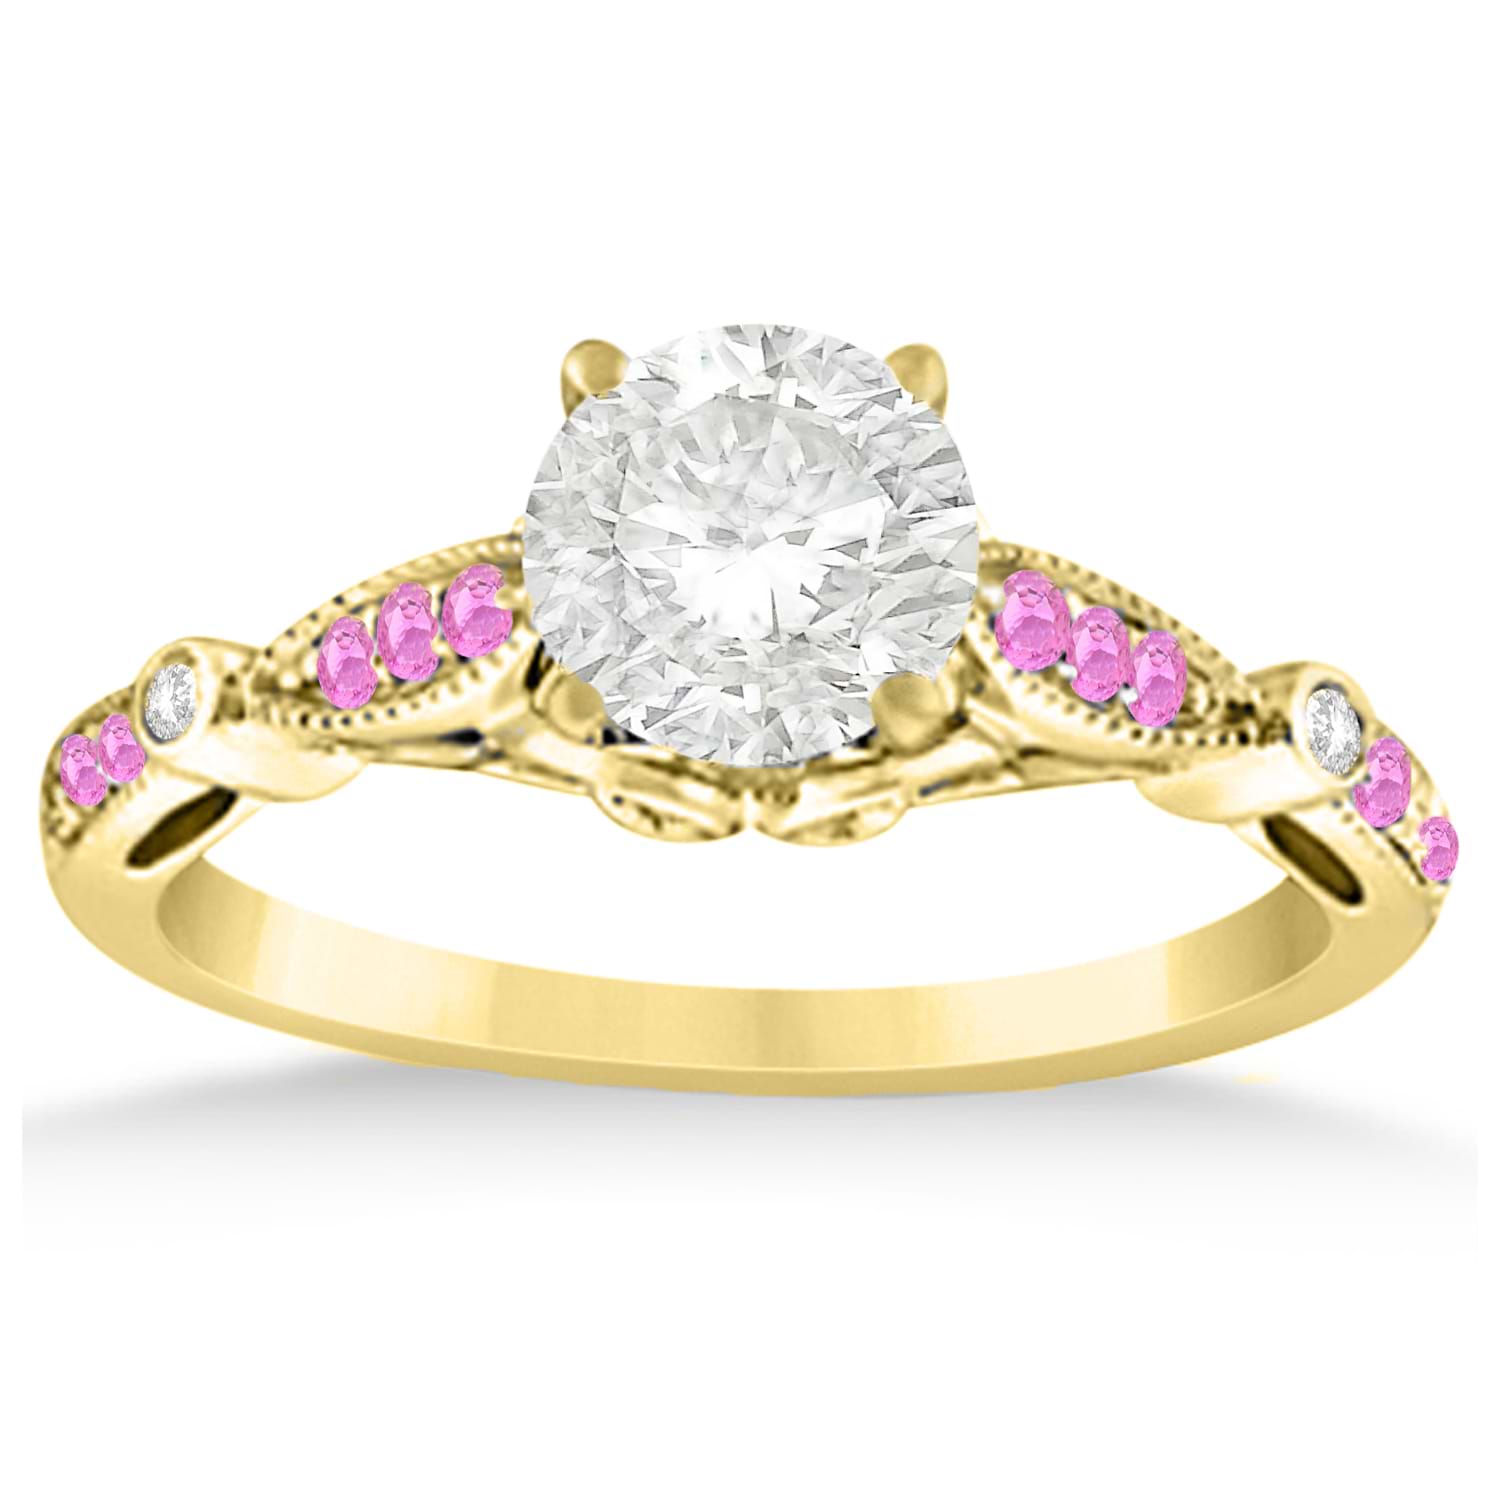 Marquise & Dot Pink Sapphire Vintage Engagement Ring 14k Yellow Gold 0.13ct